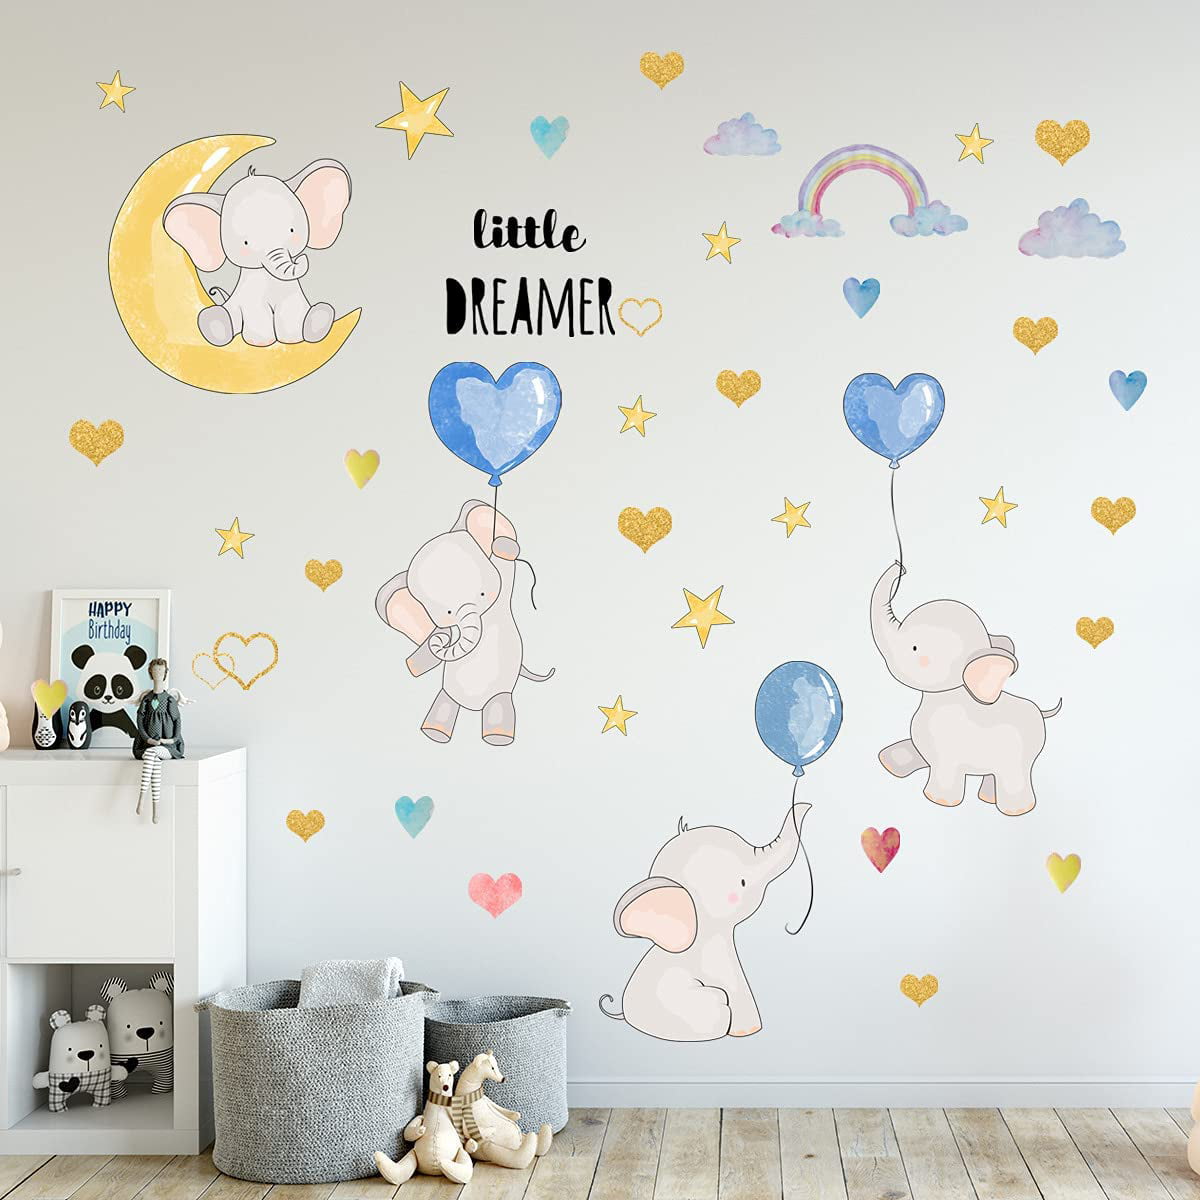 Cute Elephant Love Hearts and Stars Wall Stickers Colorful Balloon Flying Animals Wall Decals DILIBRA Removable Peel and Stick Cartoon Neutral Vinyl Wall Decor for Kids Nursery Bedroom Living Room 